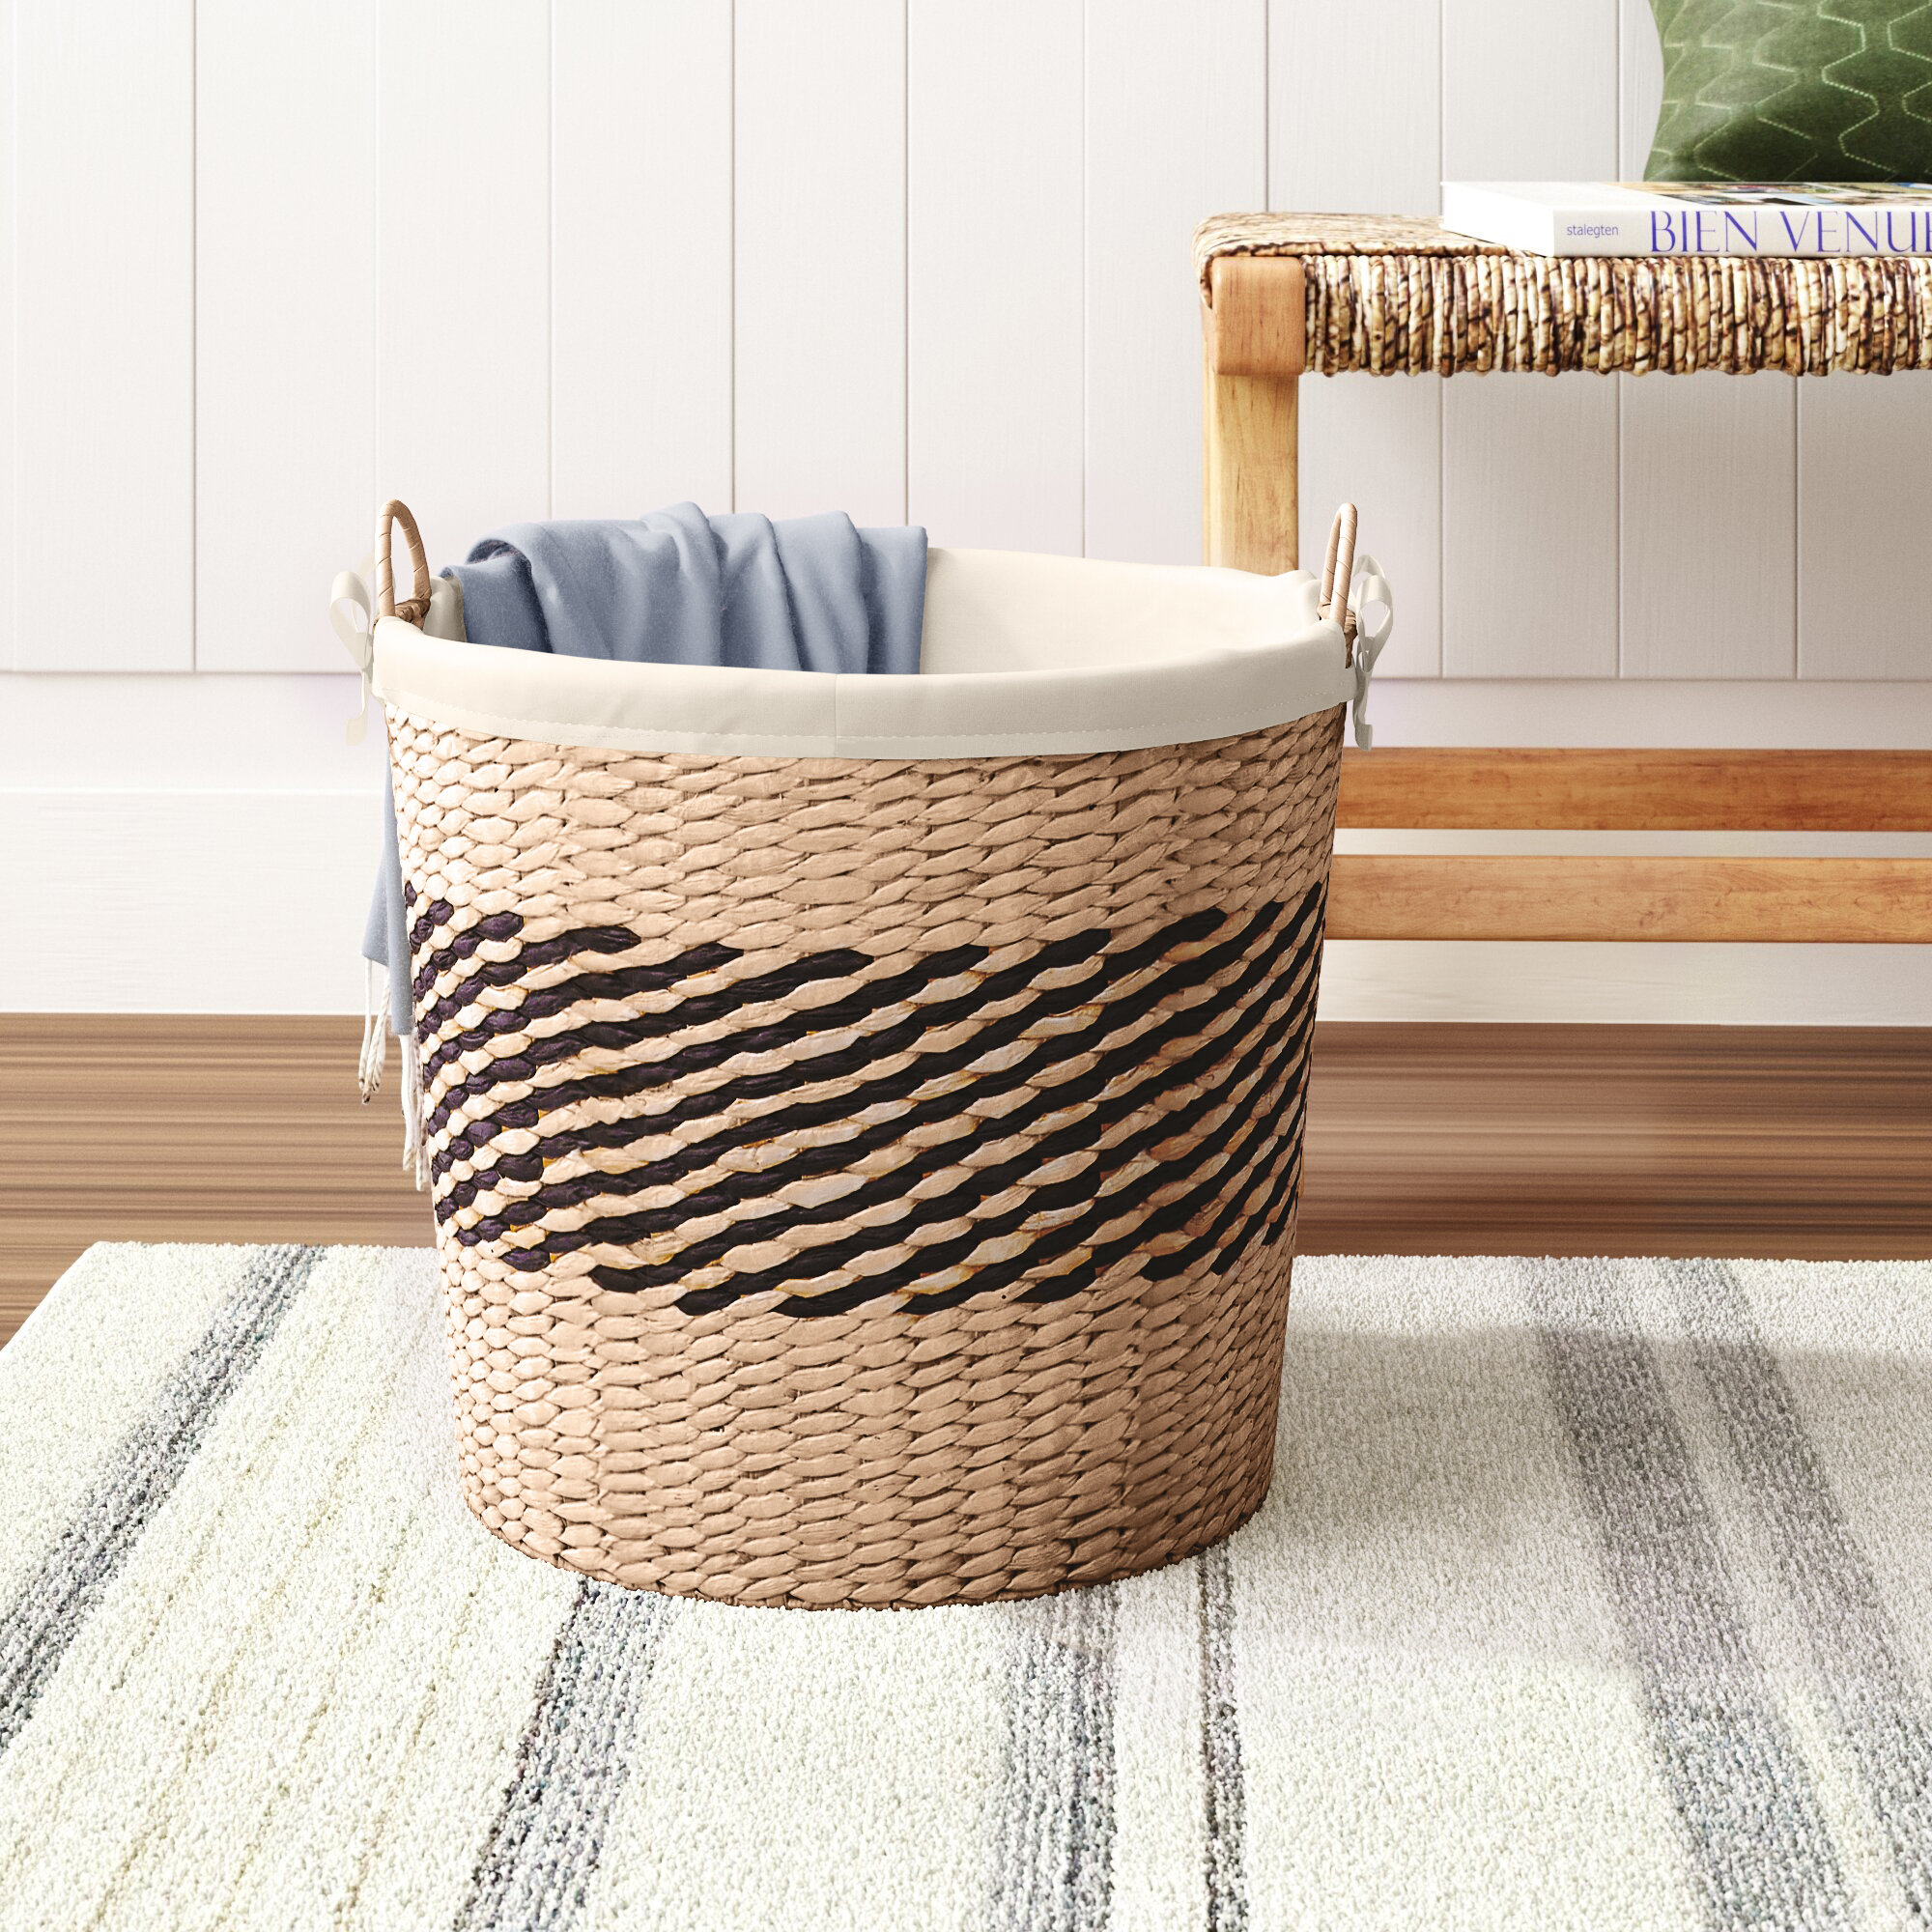 Americanflat Set of 4 Brown Woven Nesting Storage Baskets Removable Linen Liners 